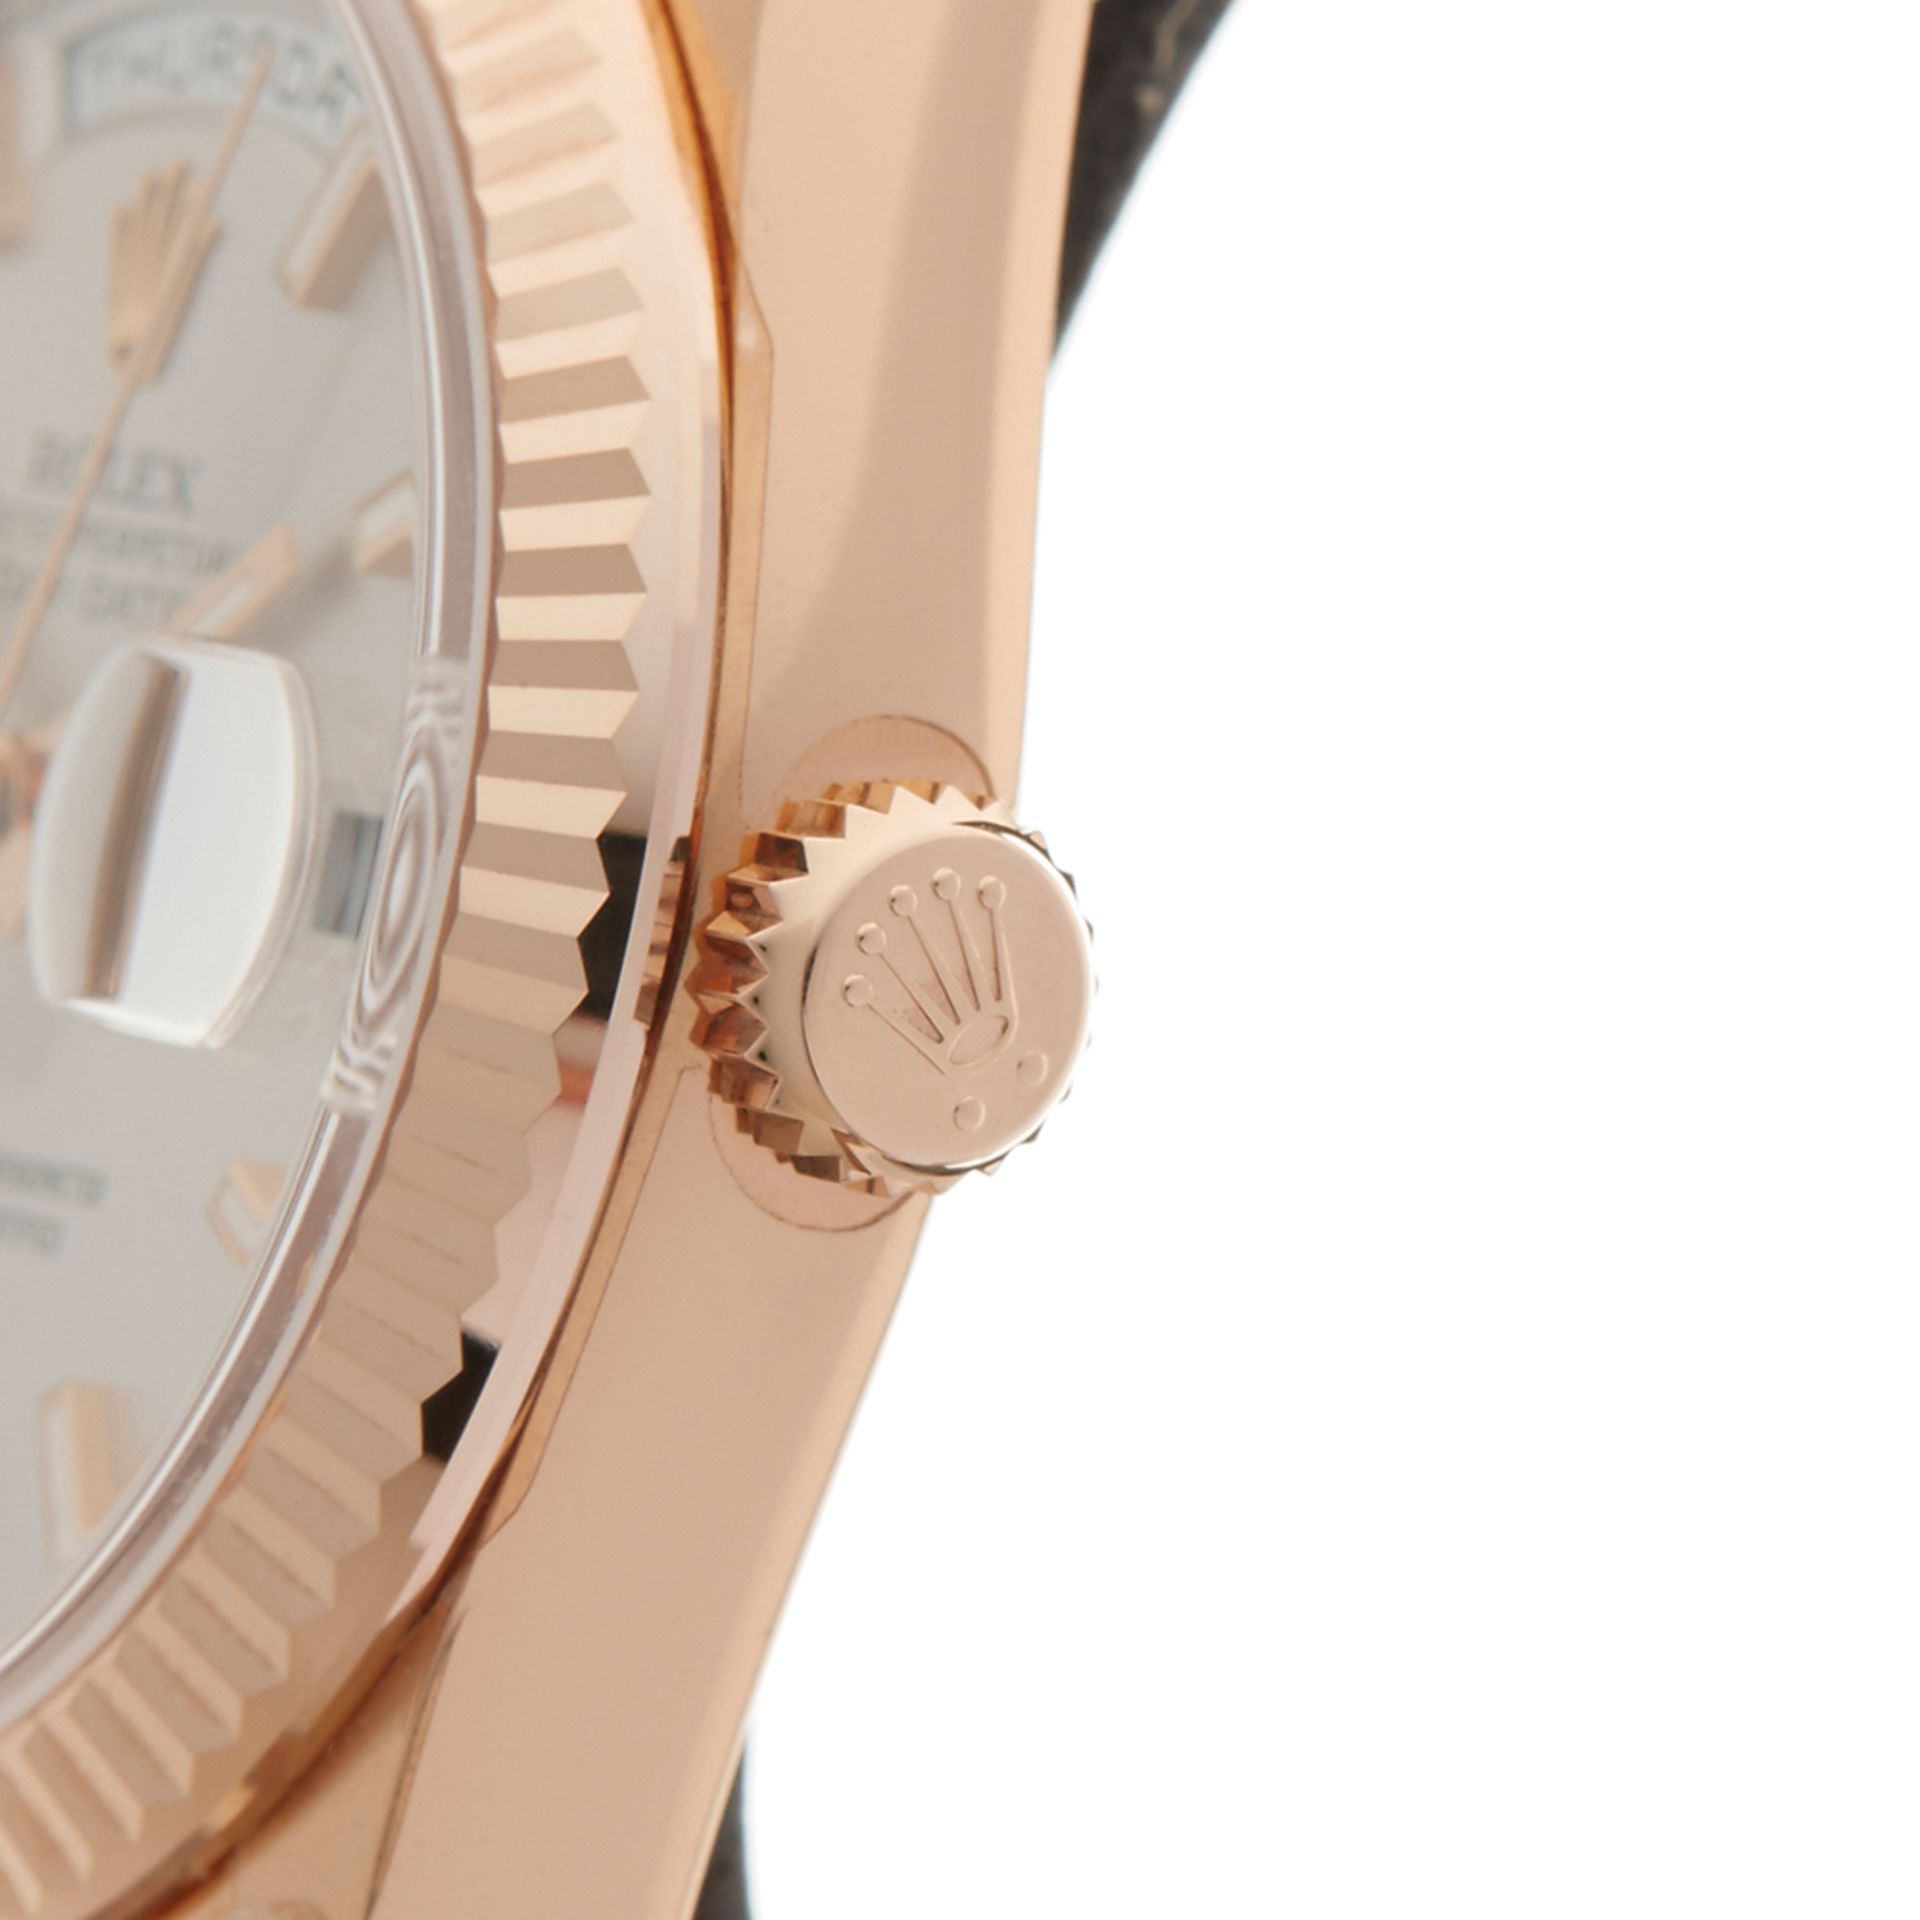 Rolex Day-Date 36mm 18k Rose Gold - 118135 - Image 4 of 9